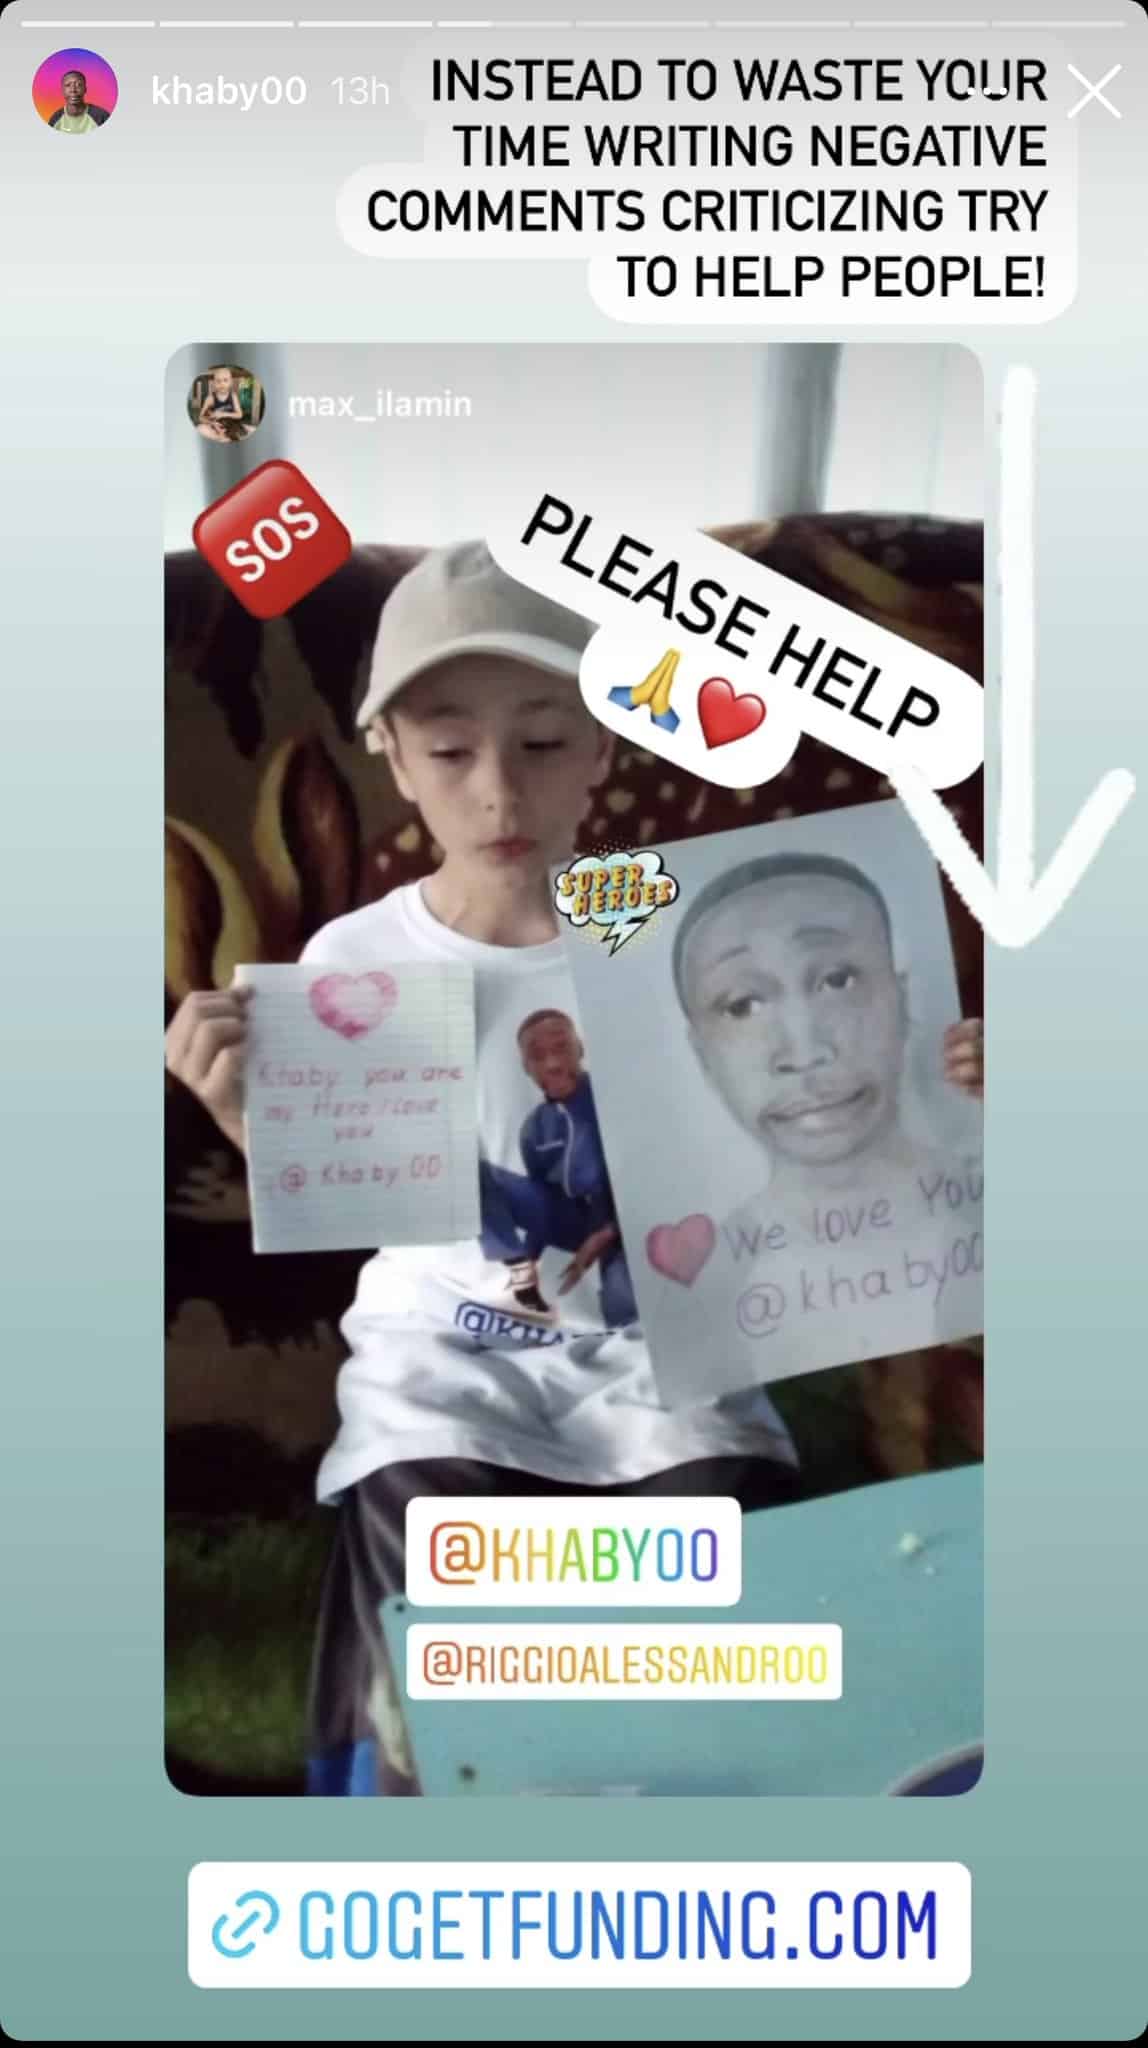 Khaby Lame charity direct Instagram